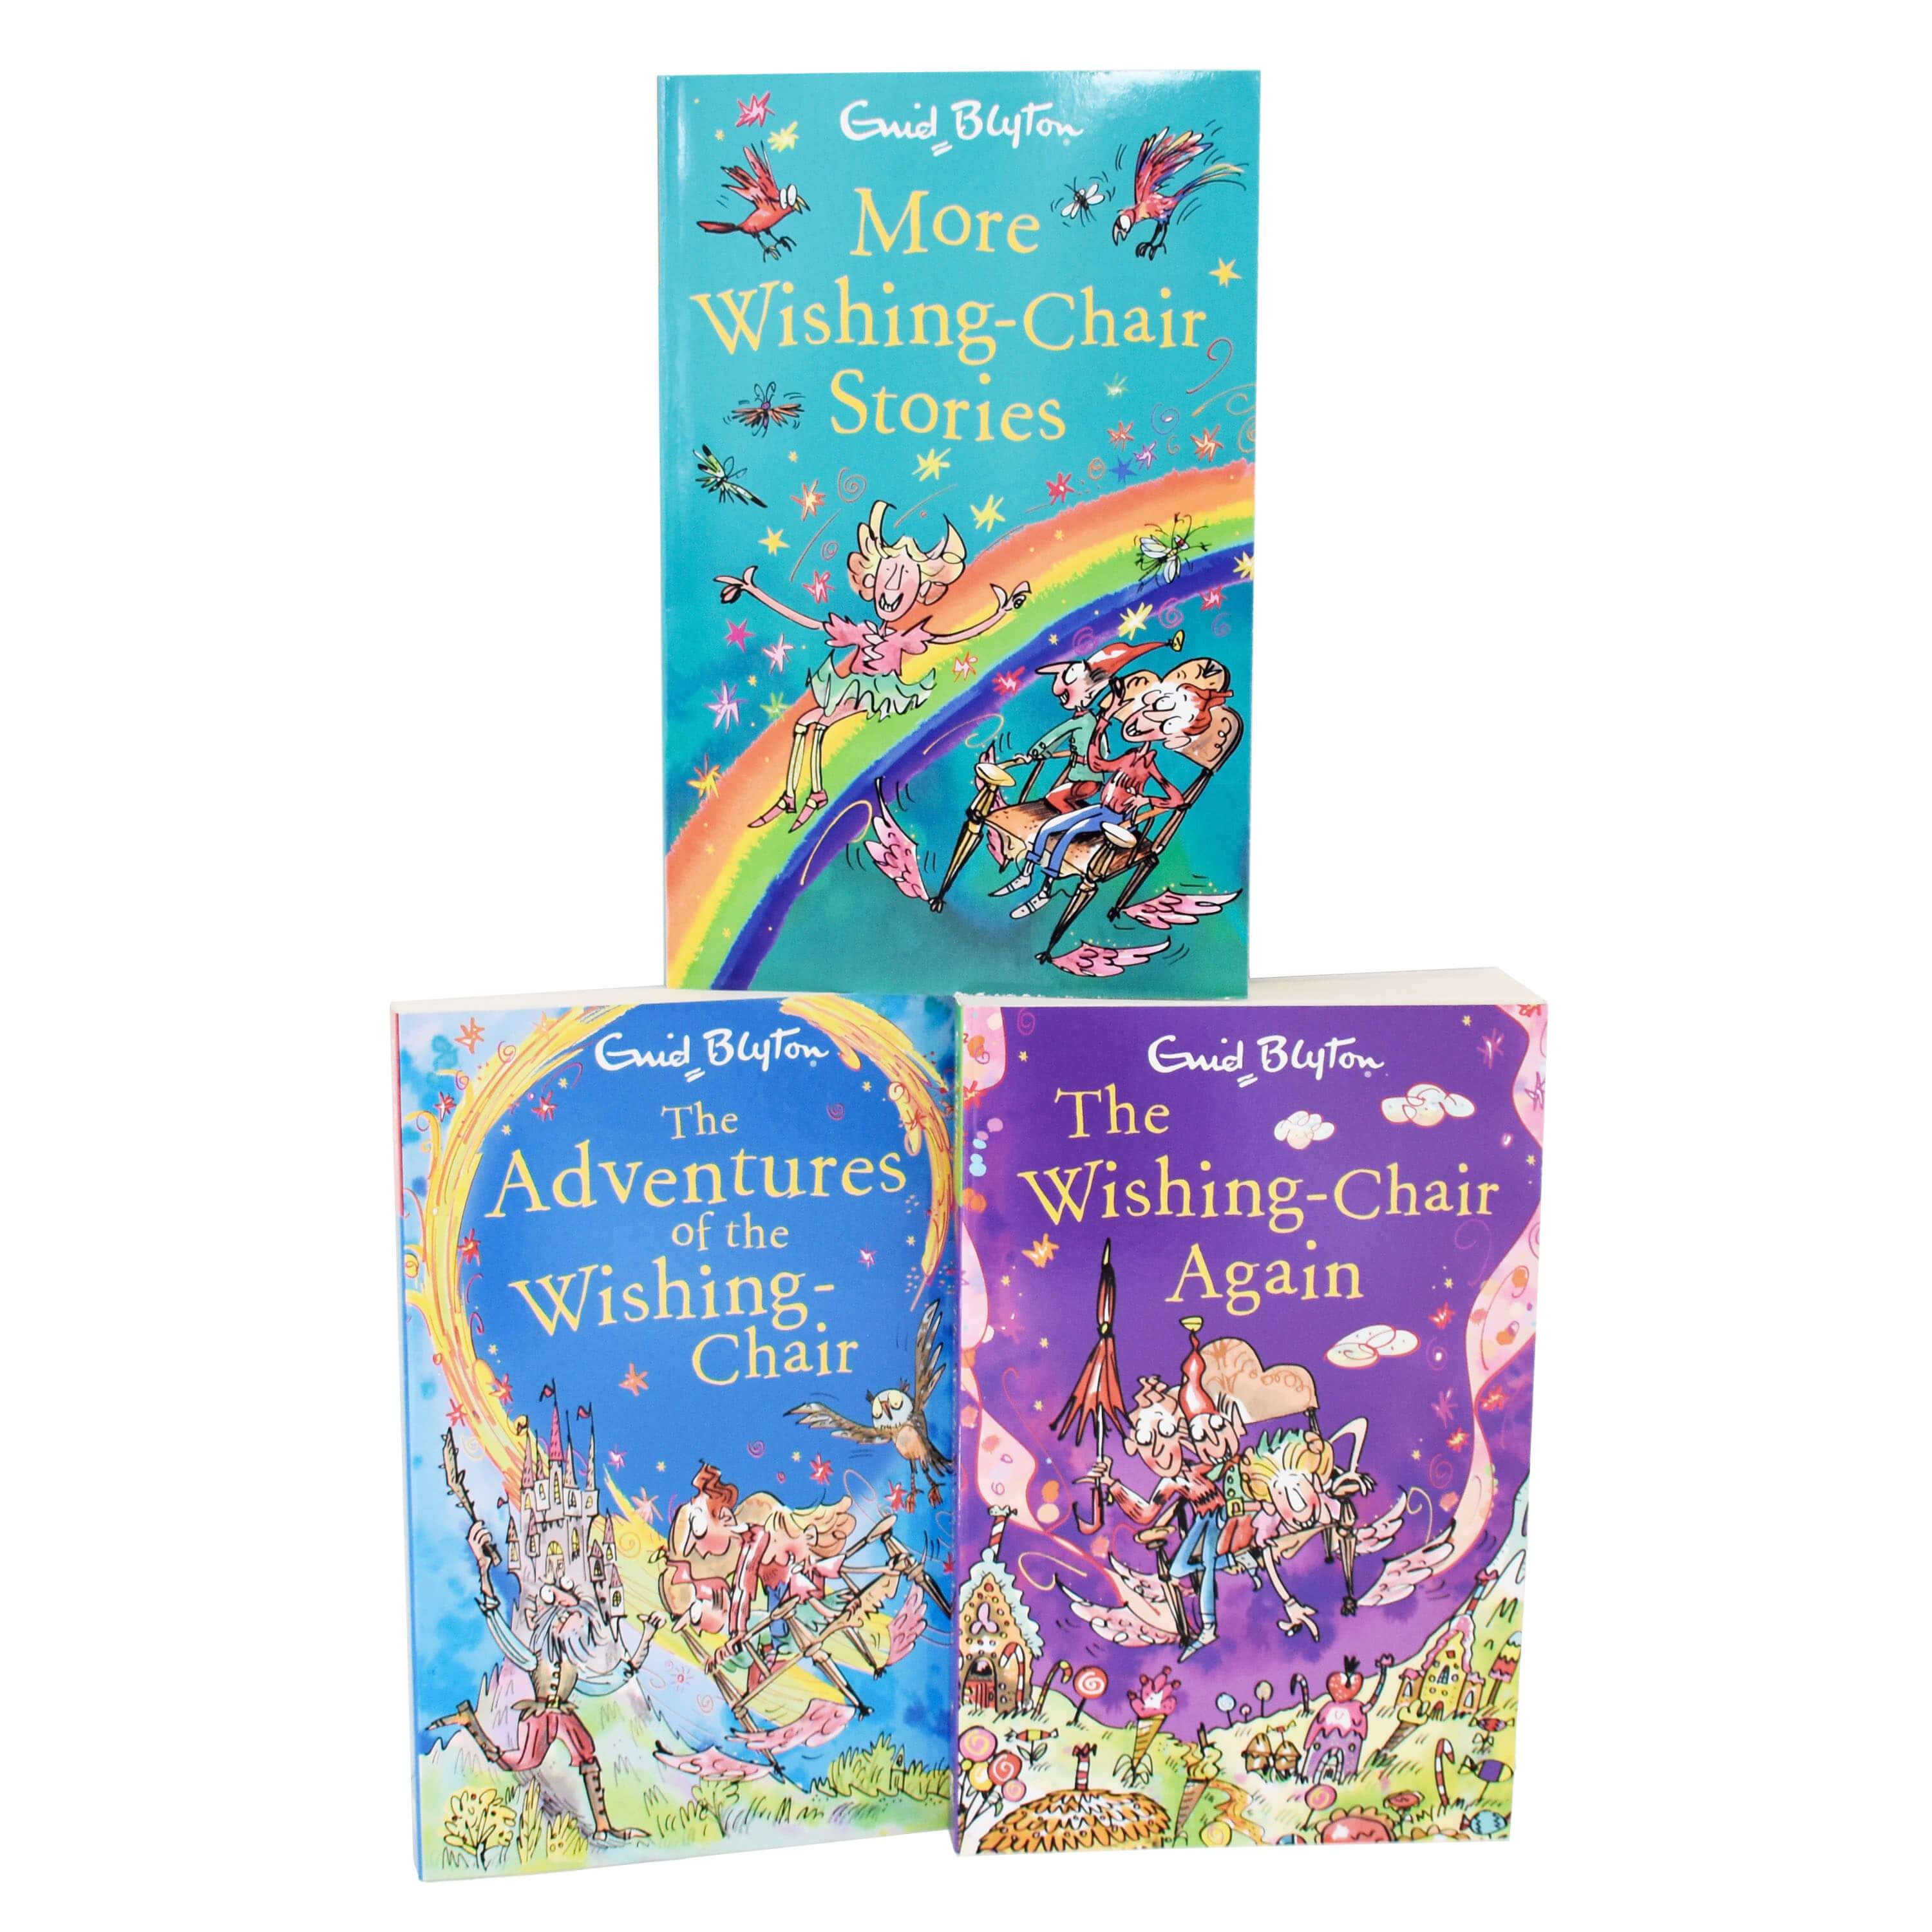 Enid Blyton The Wishing Chair 3 Book Collection By Enid Blyton New Cover - Ages 5-7 - Paperback